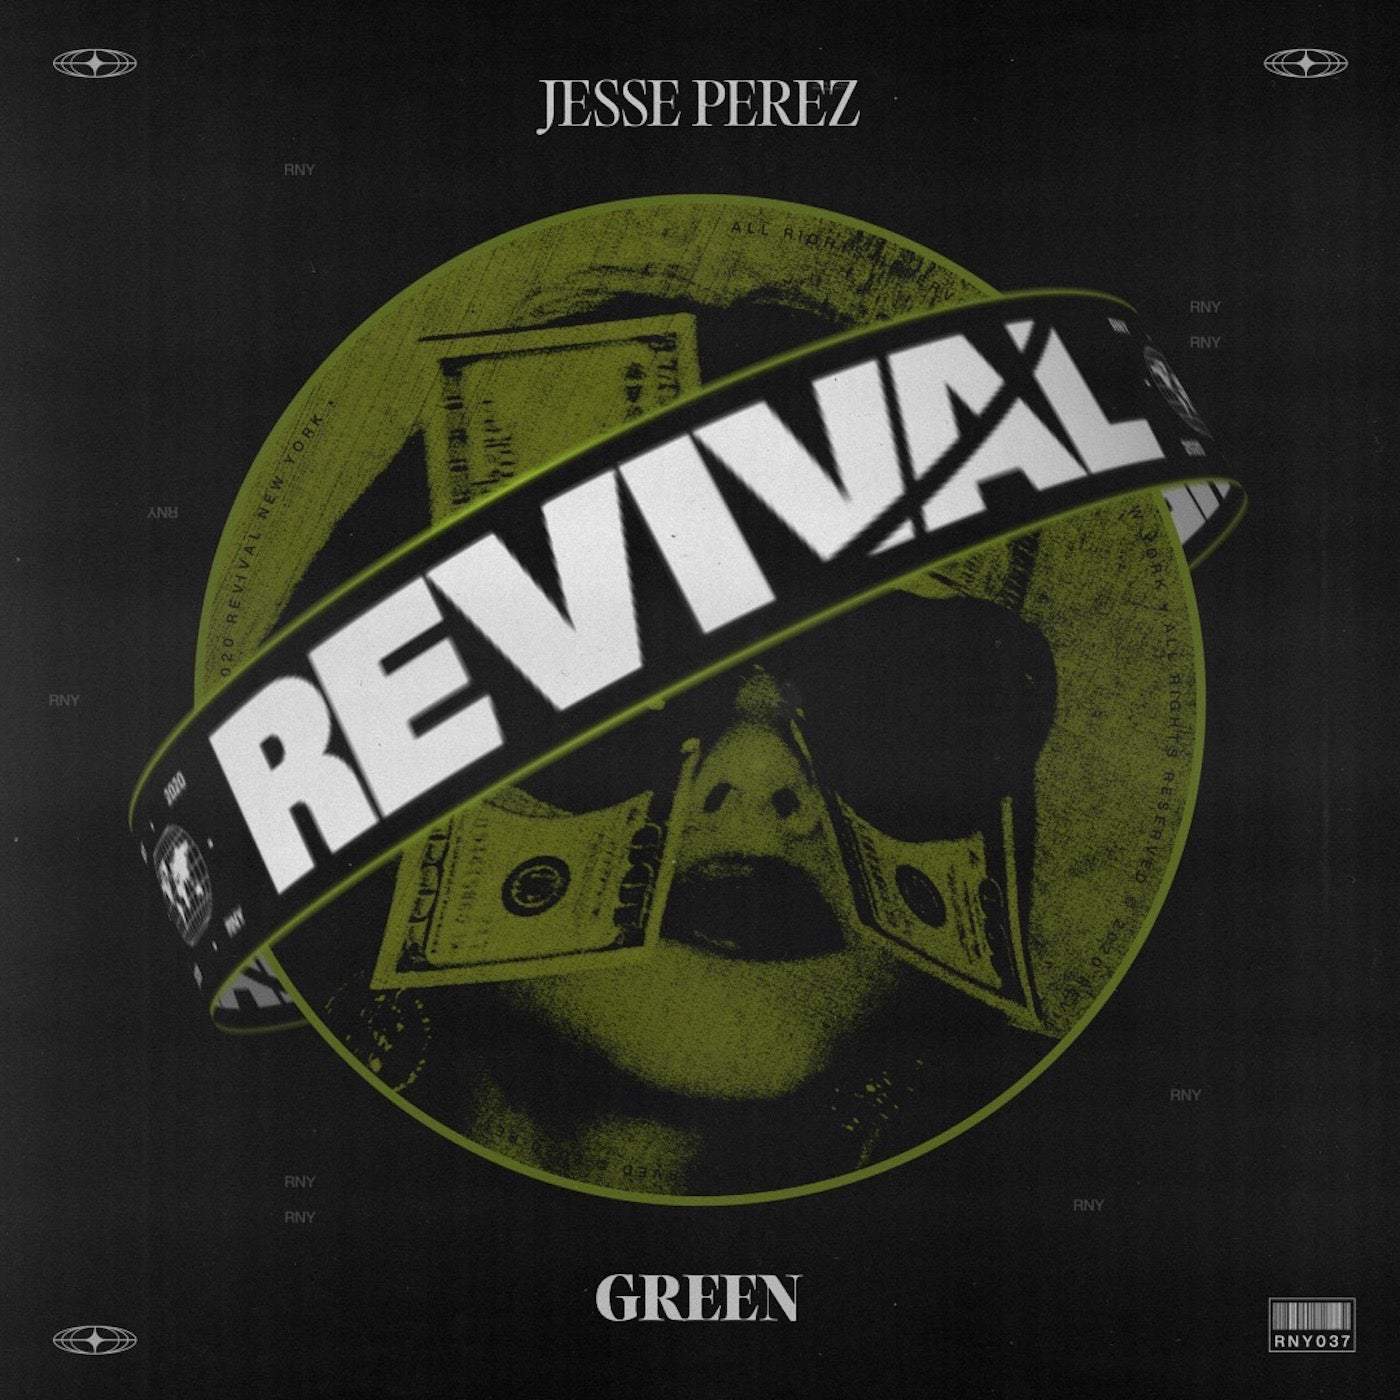 image cover: Green by Jesse Perez on Revival New York